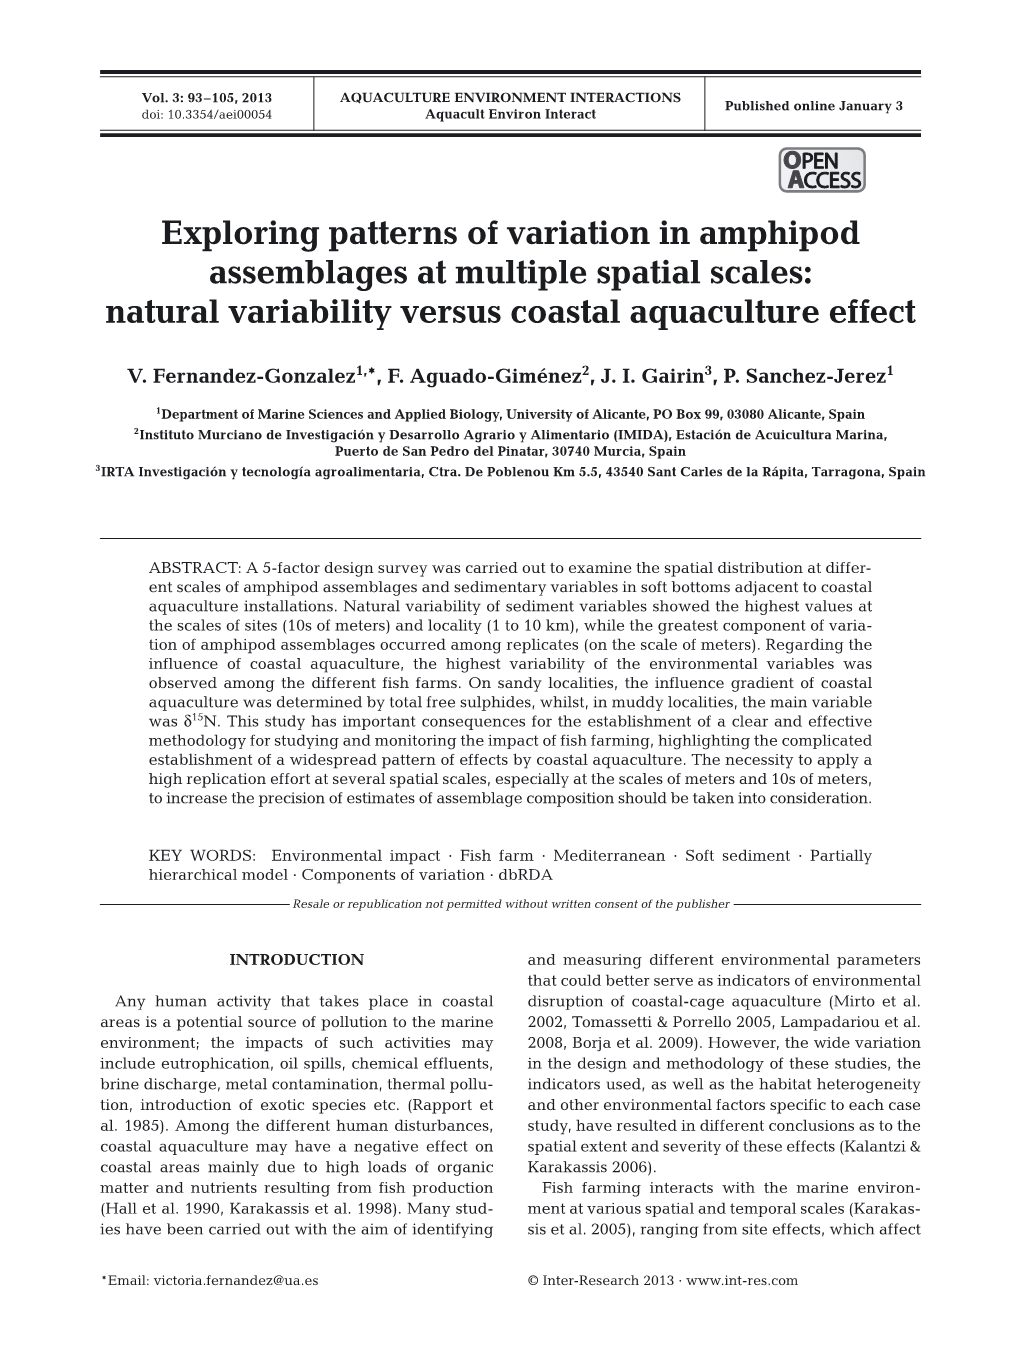 Exploring Patterns of Variation in Amphipod Assemblages at Multiple Spatial Scales: Natural Variability Versus Coastal Aquaculture Effect